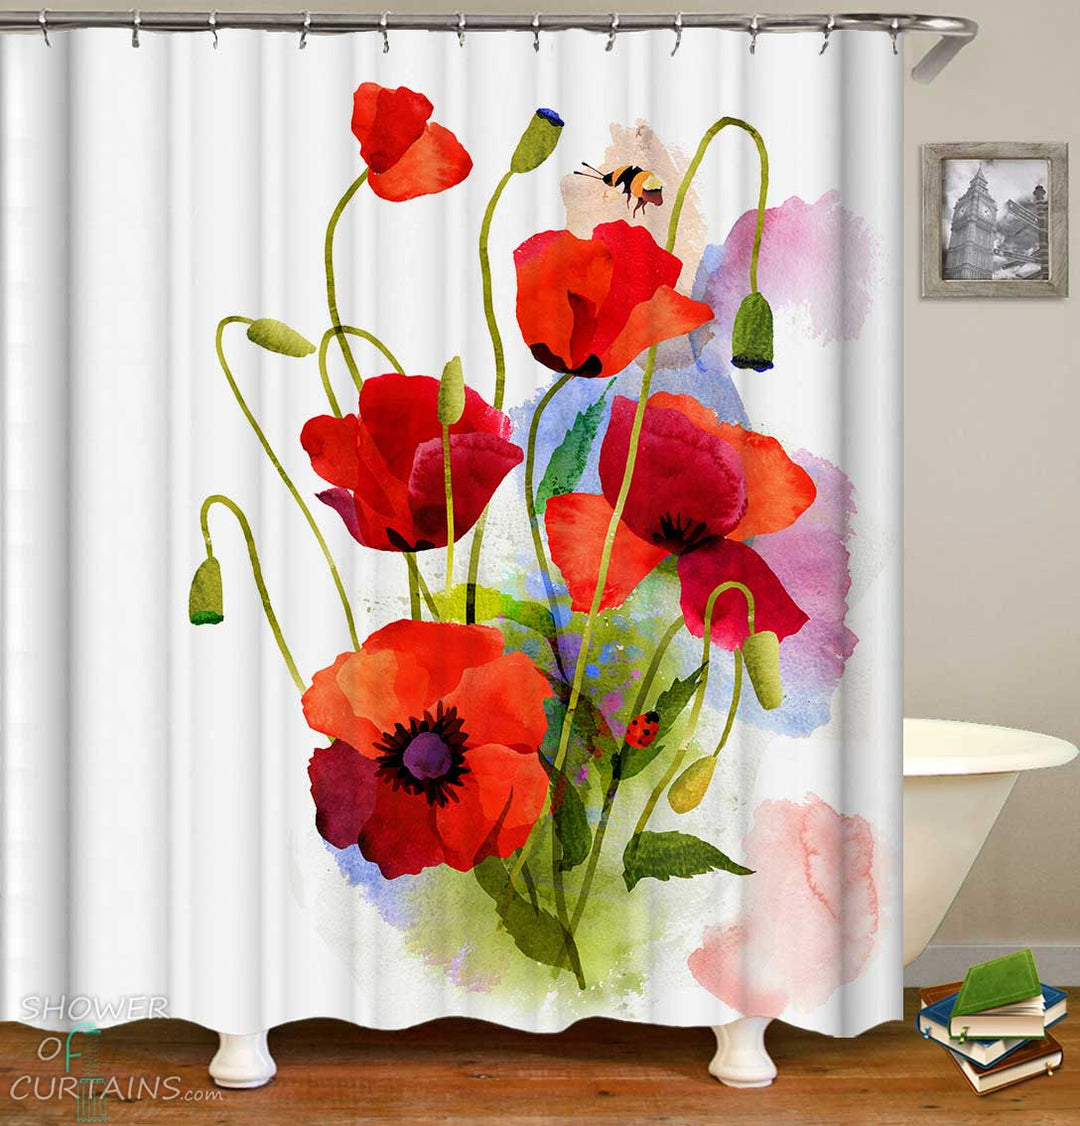 Shower Curtains with Painted Poppy Flowers